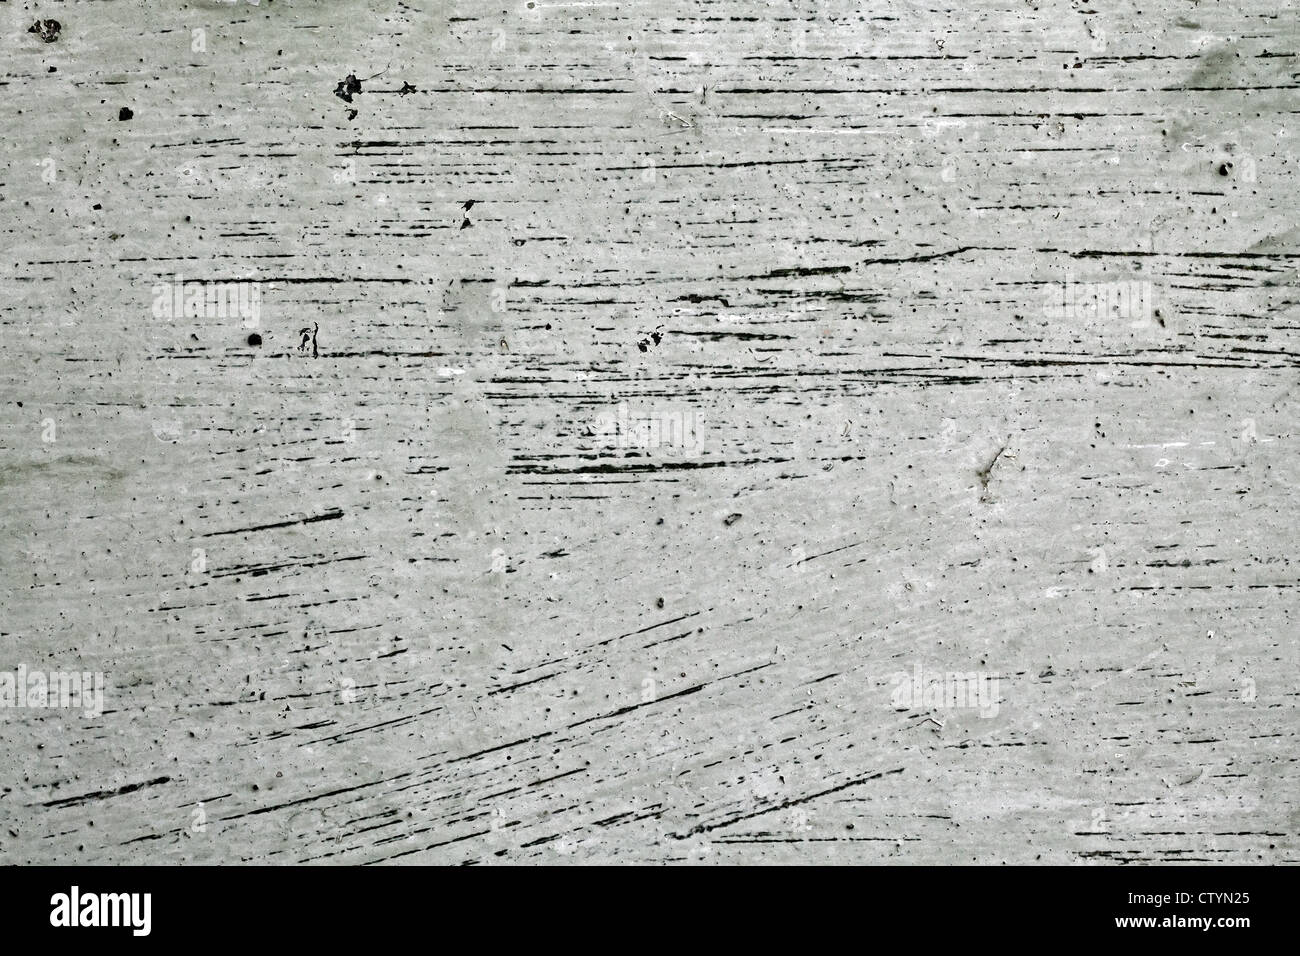 Grunge metal surface texture with scratches Stock Photo